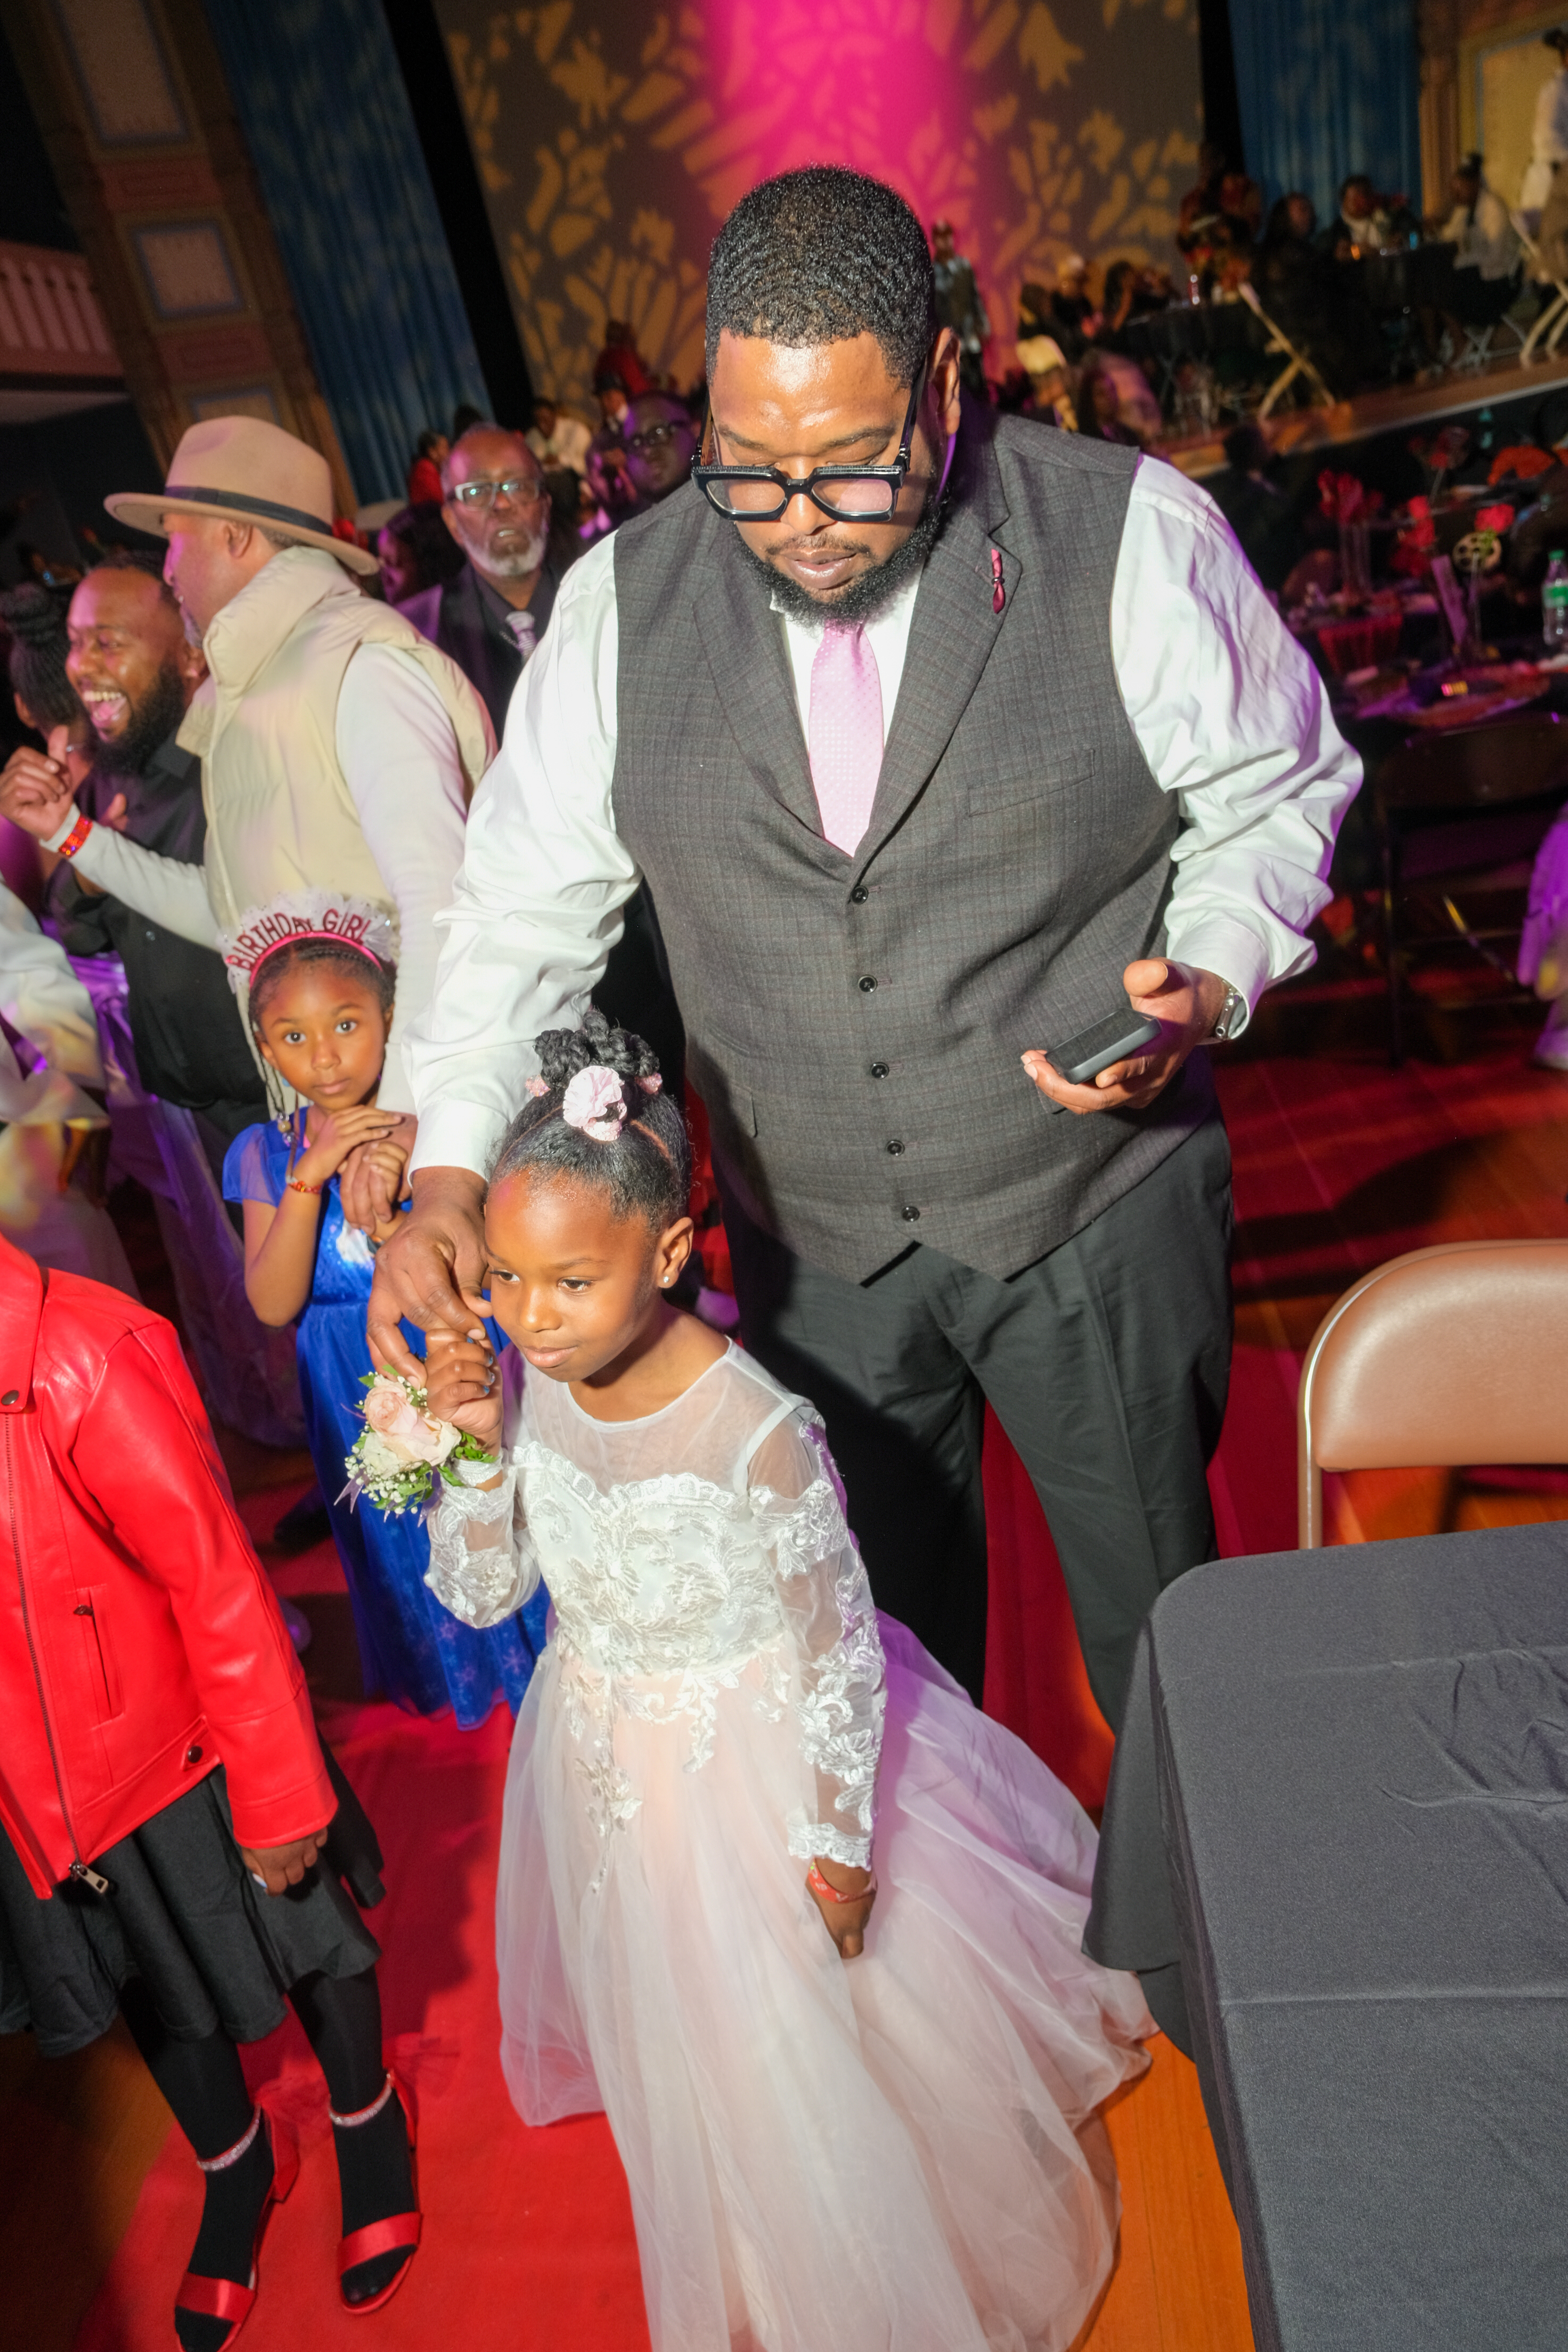 A man in a suit dances with a young girl in a white dress at a vibrant party setting with onlookers.